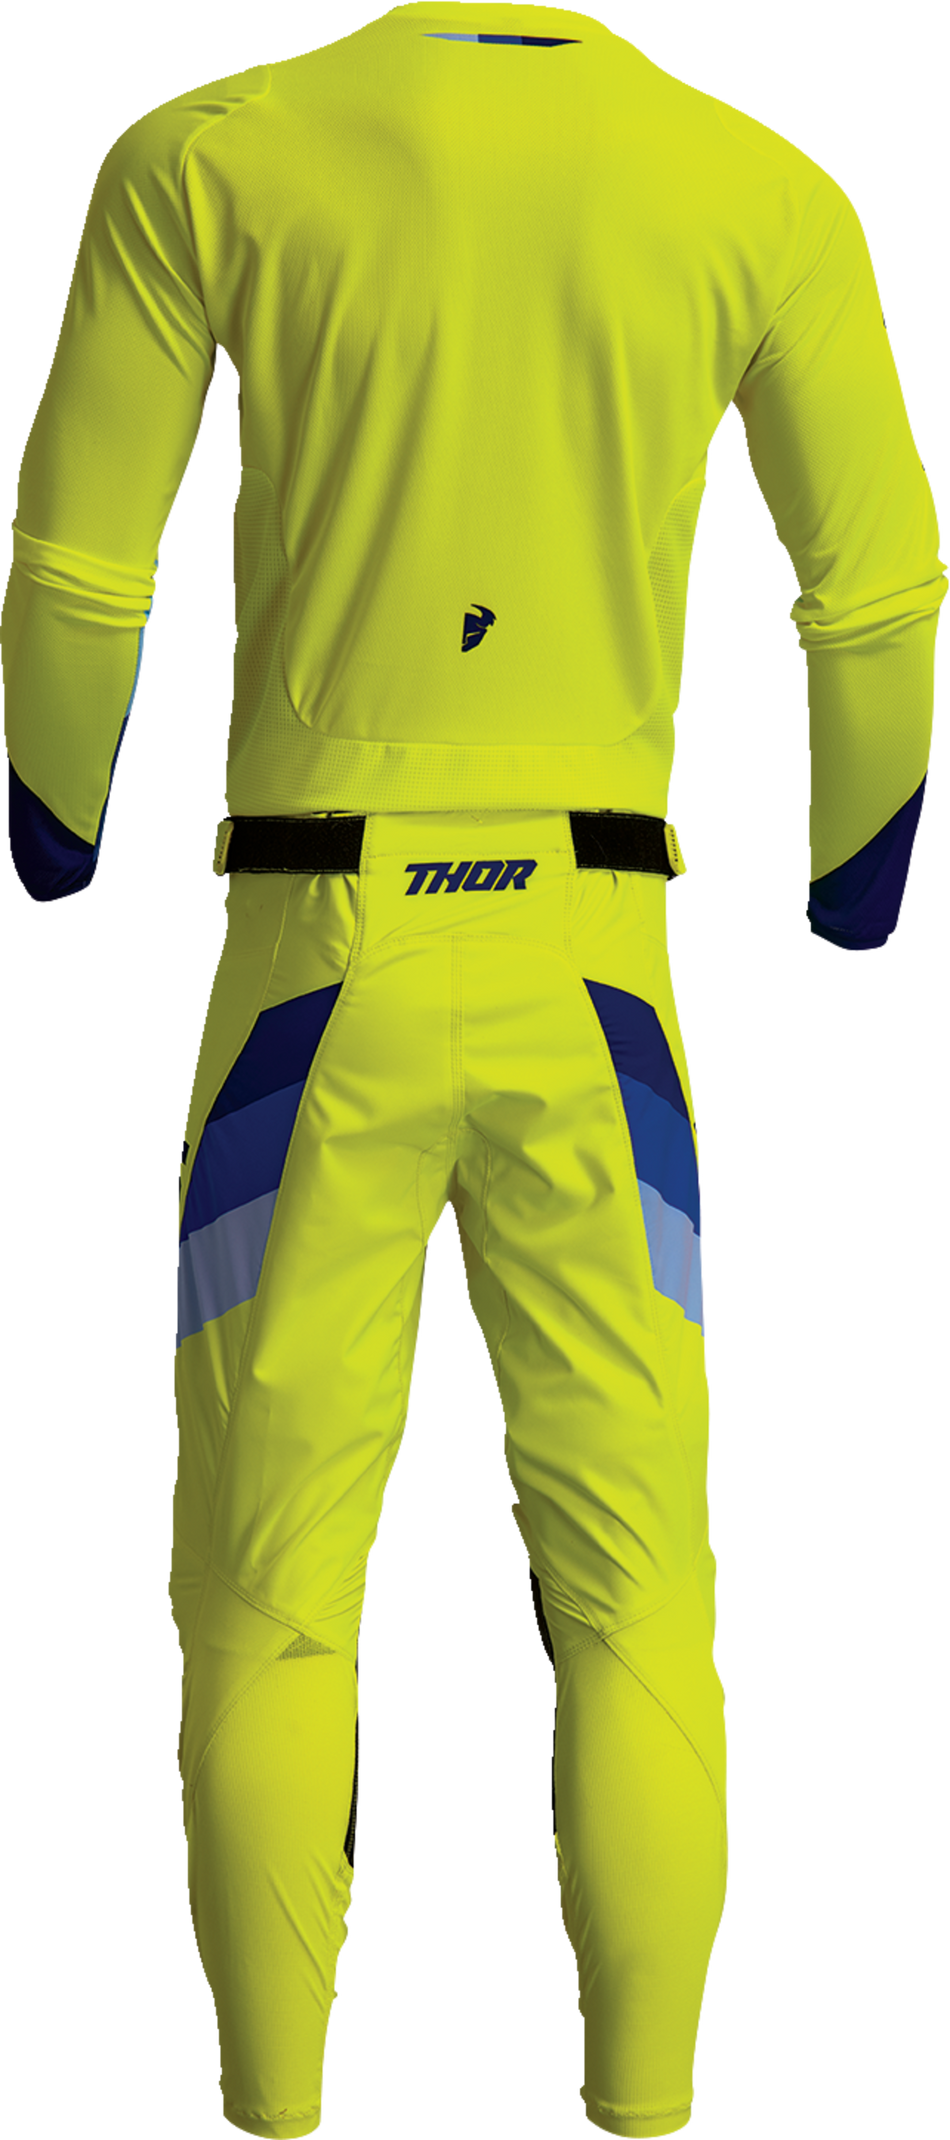 THOR Pulse Tactic Jersey - Acid - Large 2910-7069